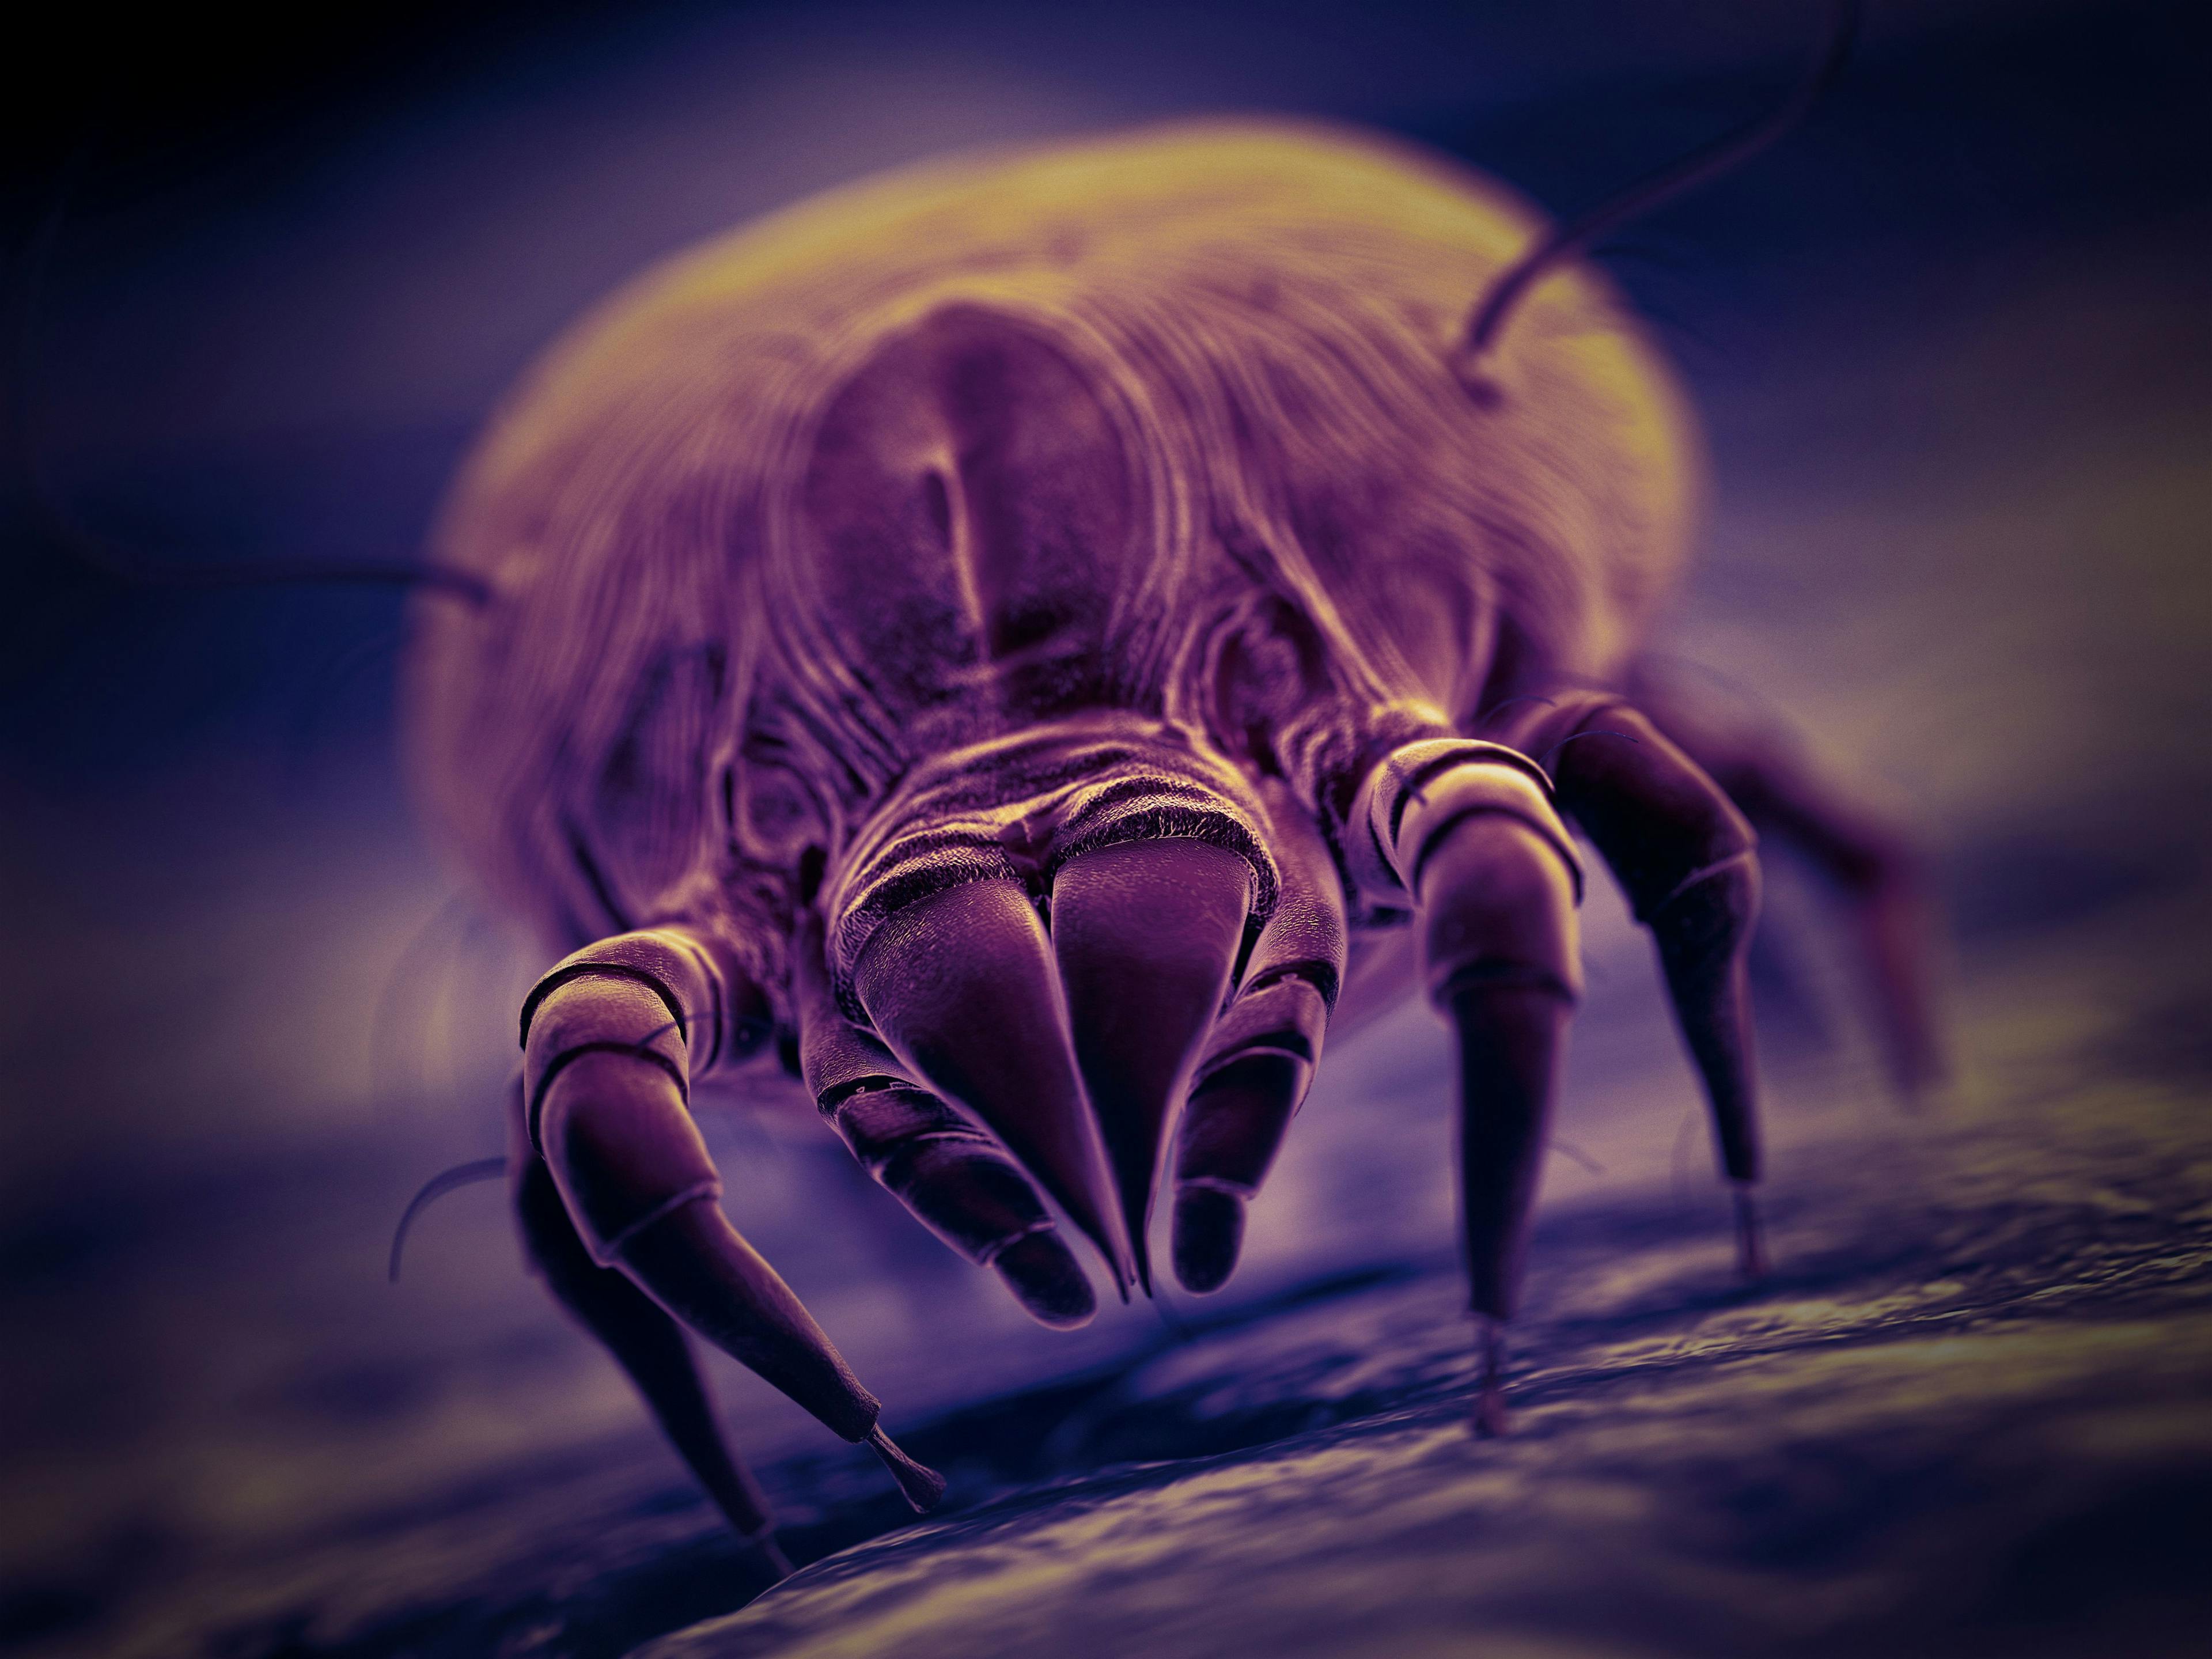 Dupixent Combined with House Dust Mite SLIT May Help Improve Control in Allergic Asthma